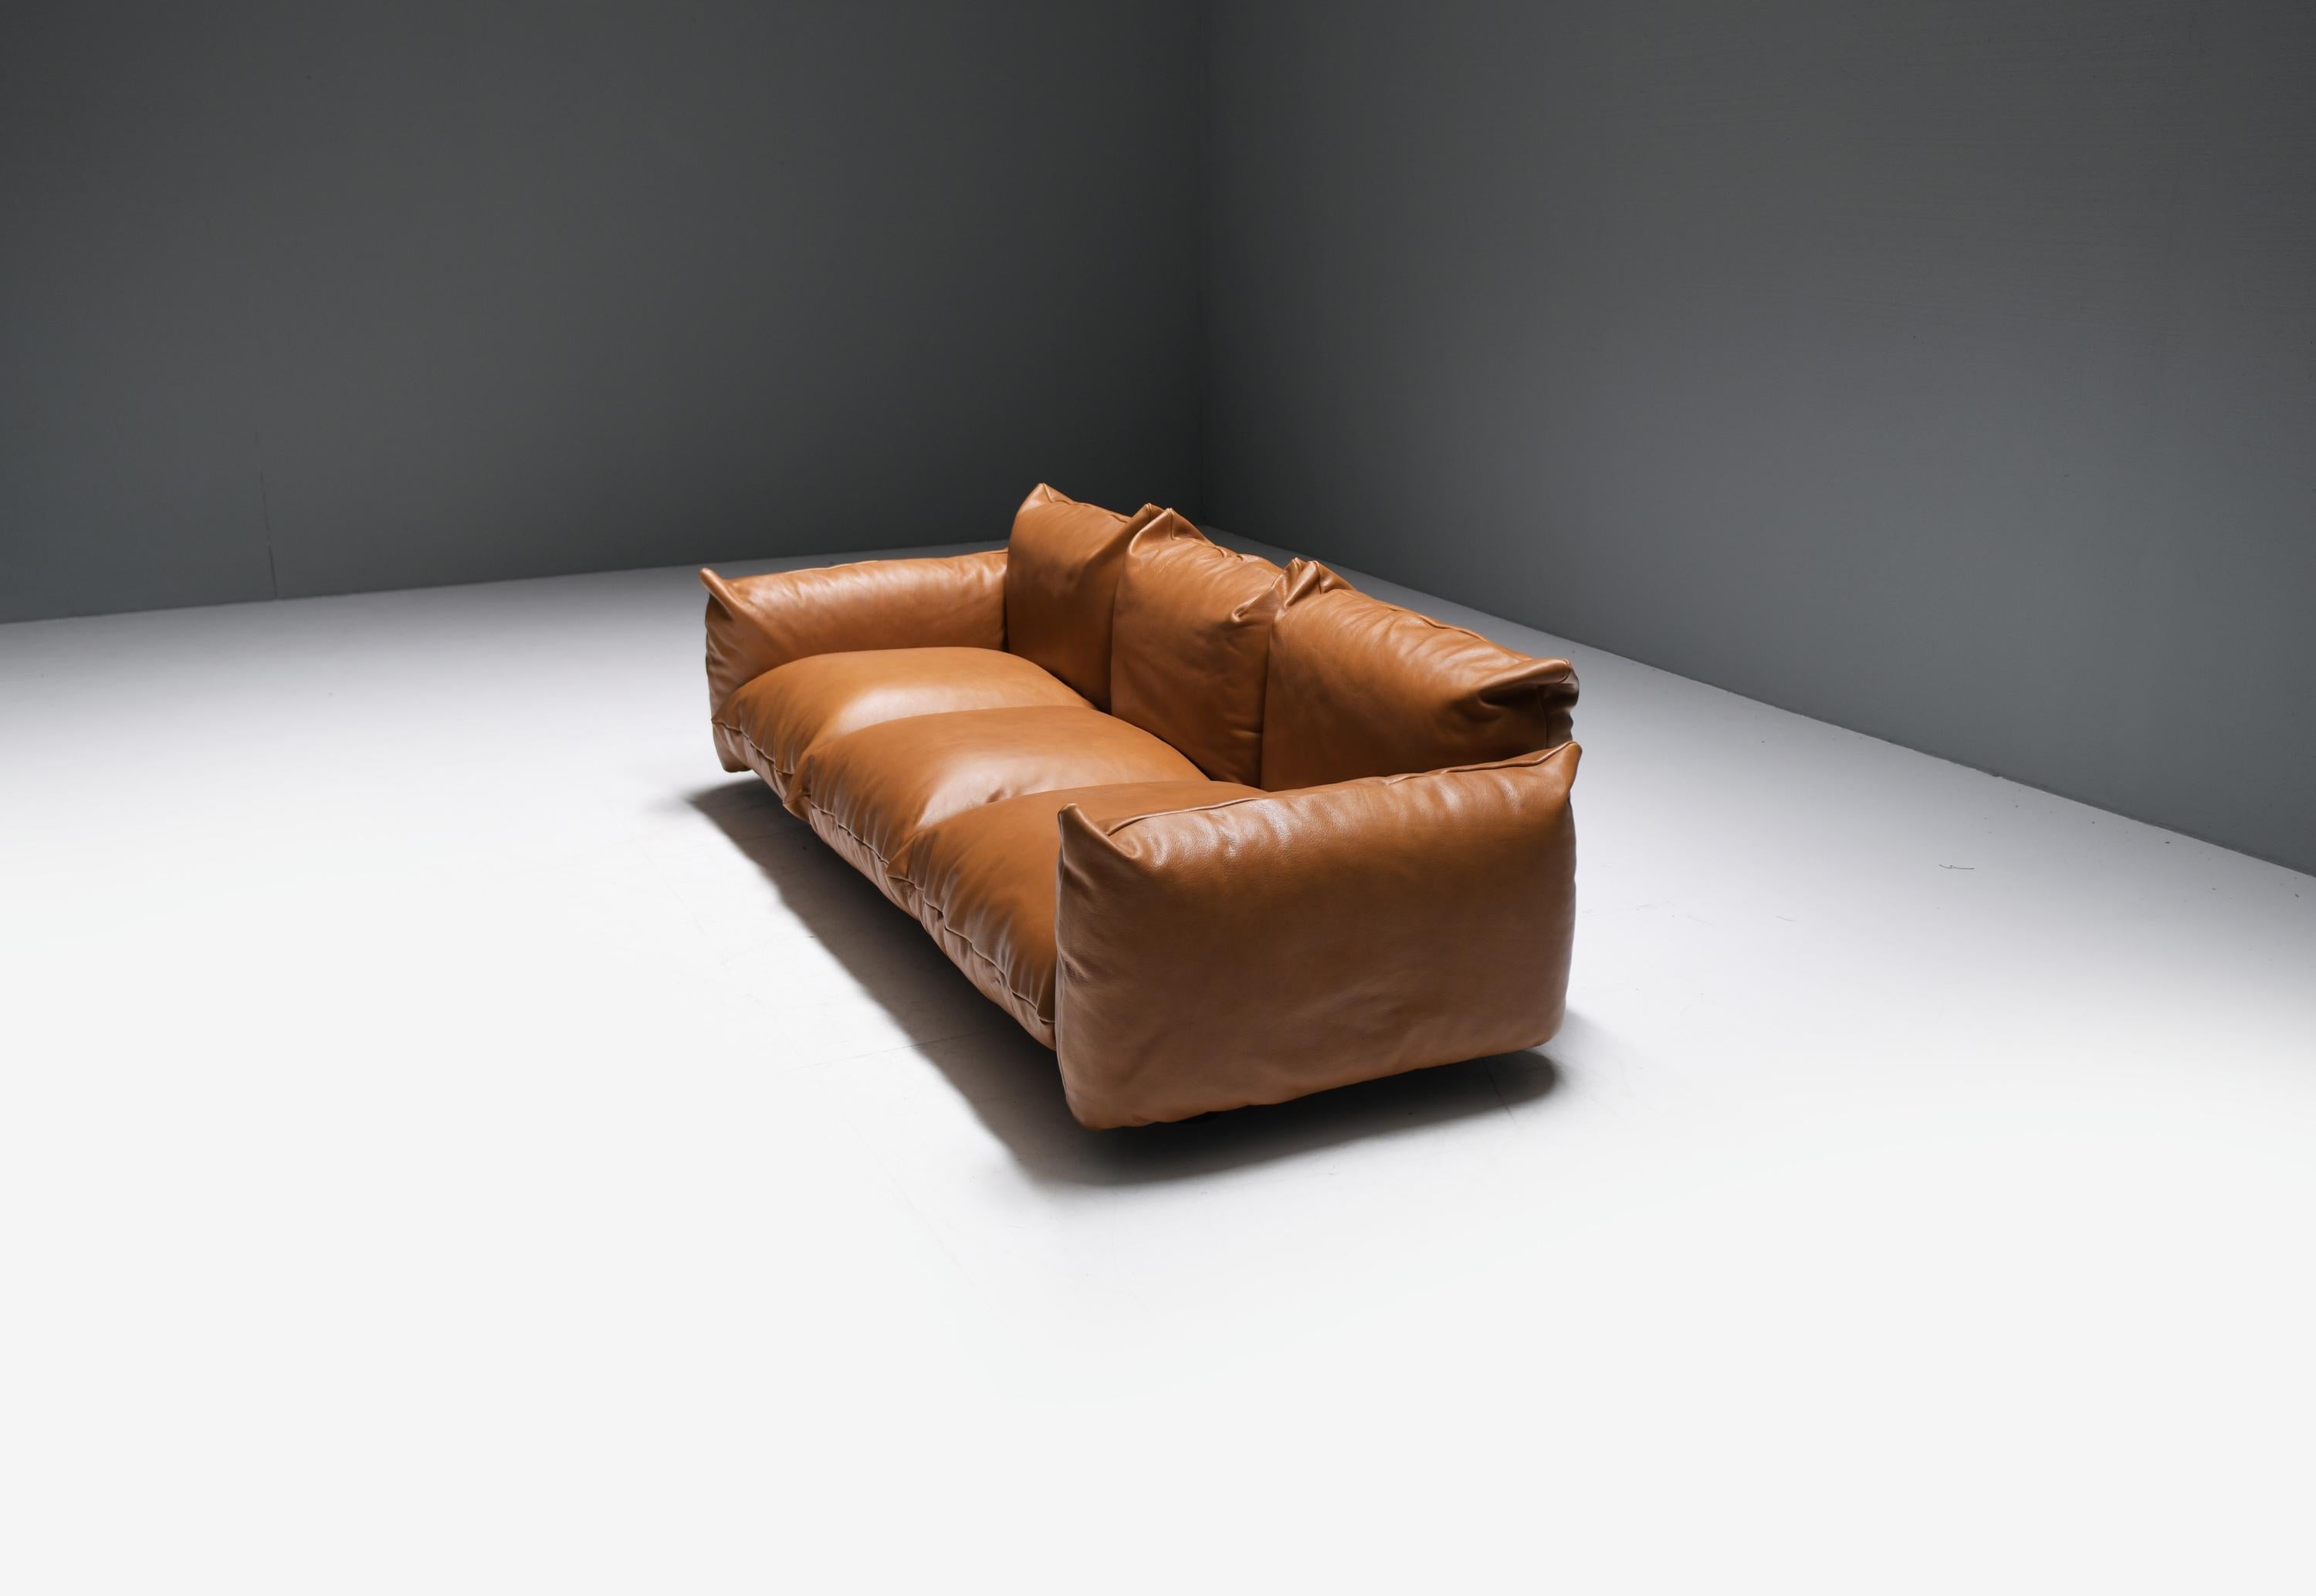 Vintage Marenco 255 sofa in new cognac leather by Mario Marenco for ARFLEX Italy For Sale 3